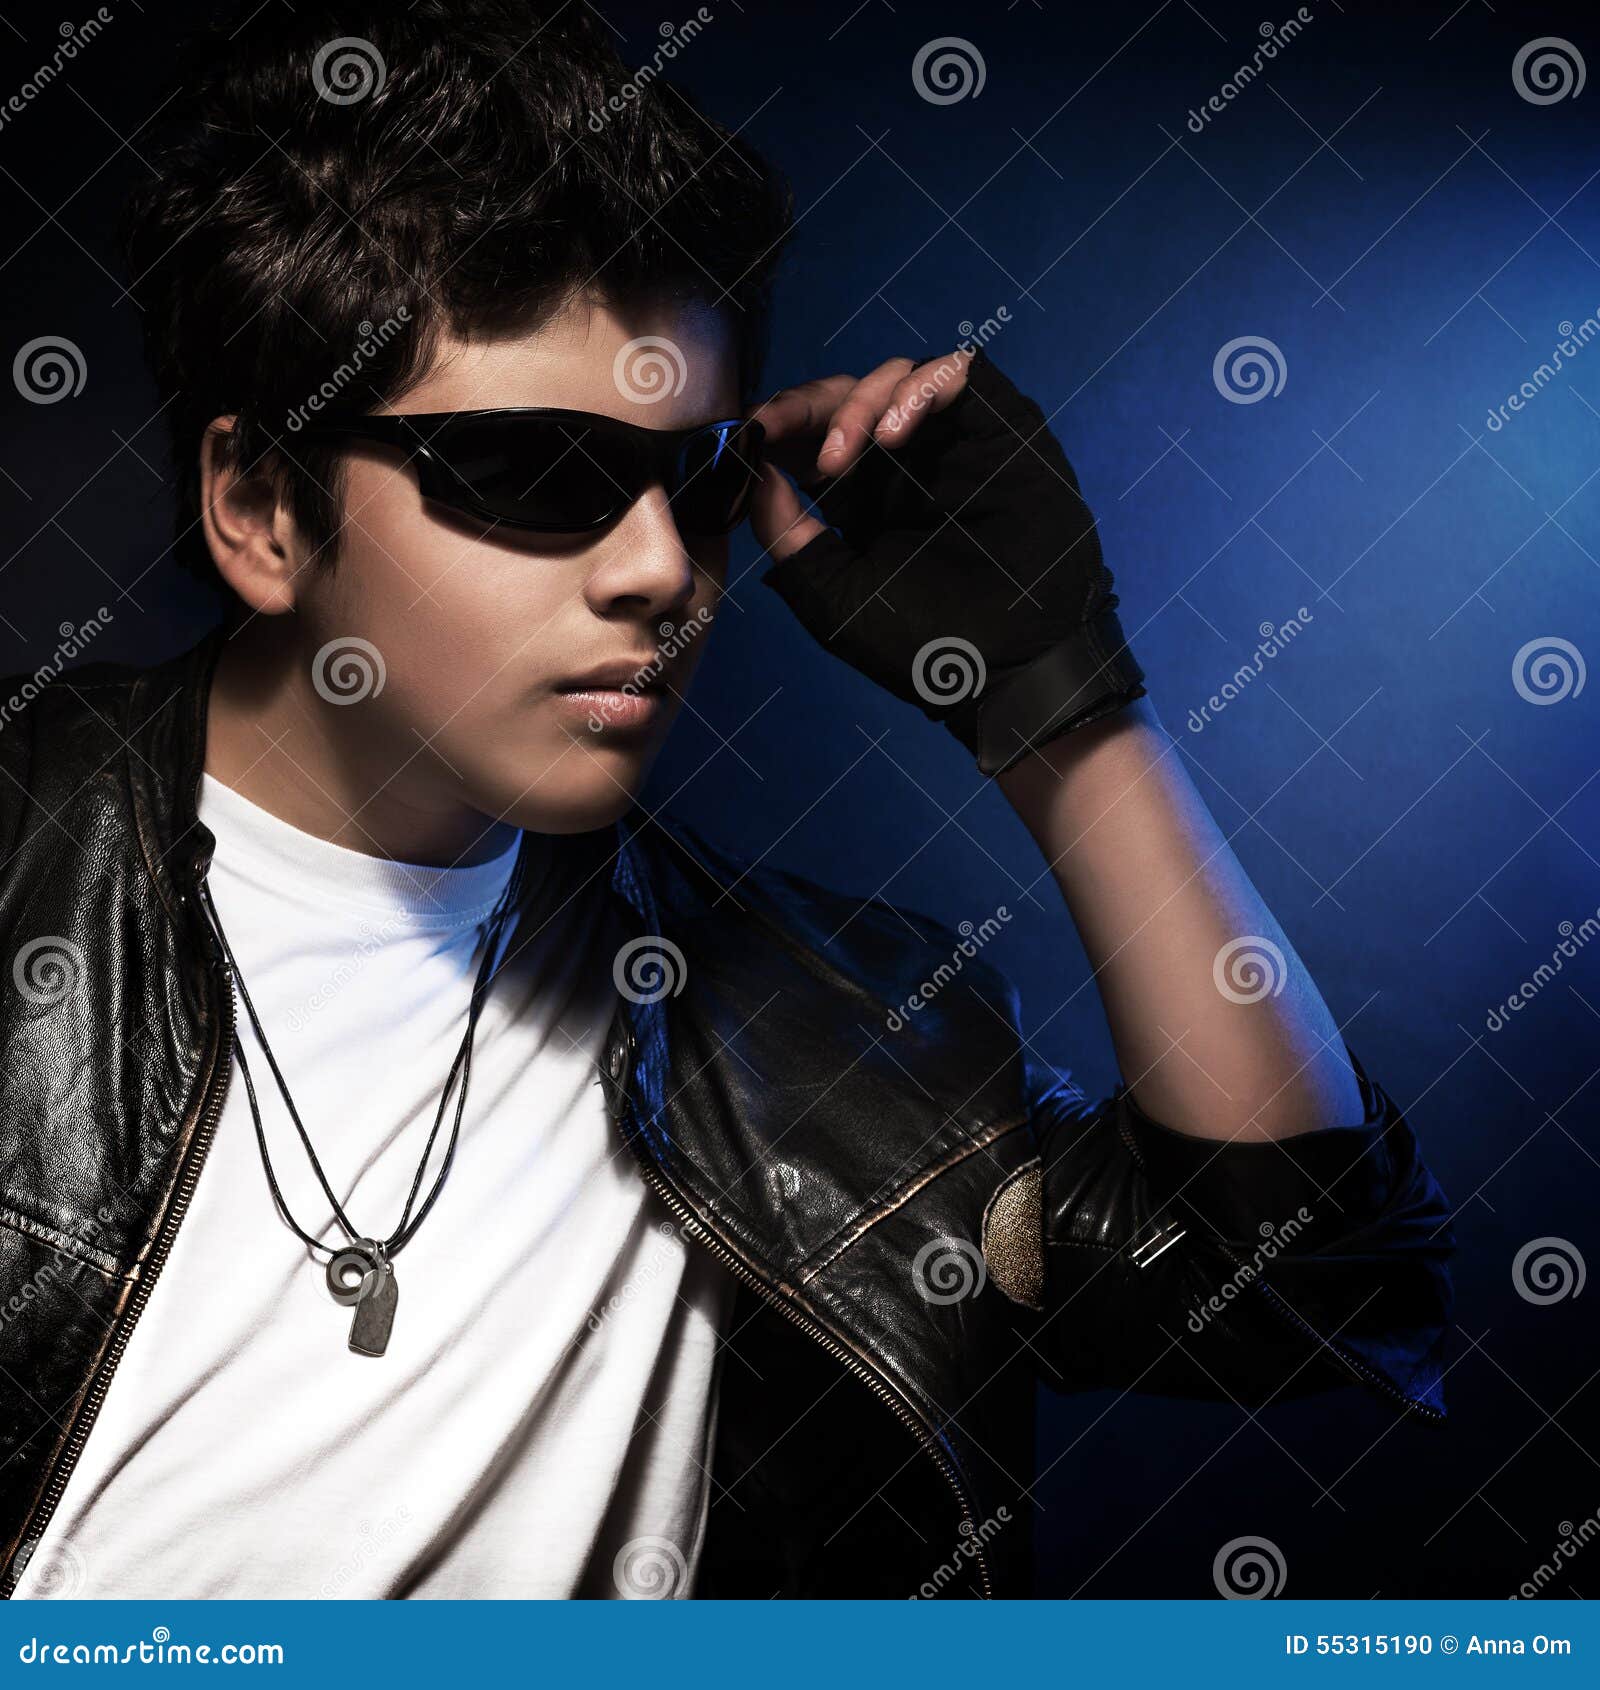 https://thumbs.dreamstime.com/z/stylish-teen-boy-portrait-beautiful-wearing-sunglasses-leather-jacket-over-blue-background-fashion-accessories-teenager-55315190.jpg